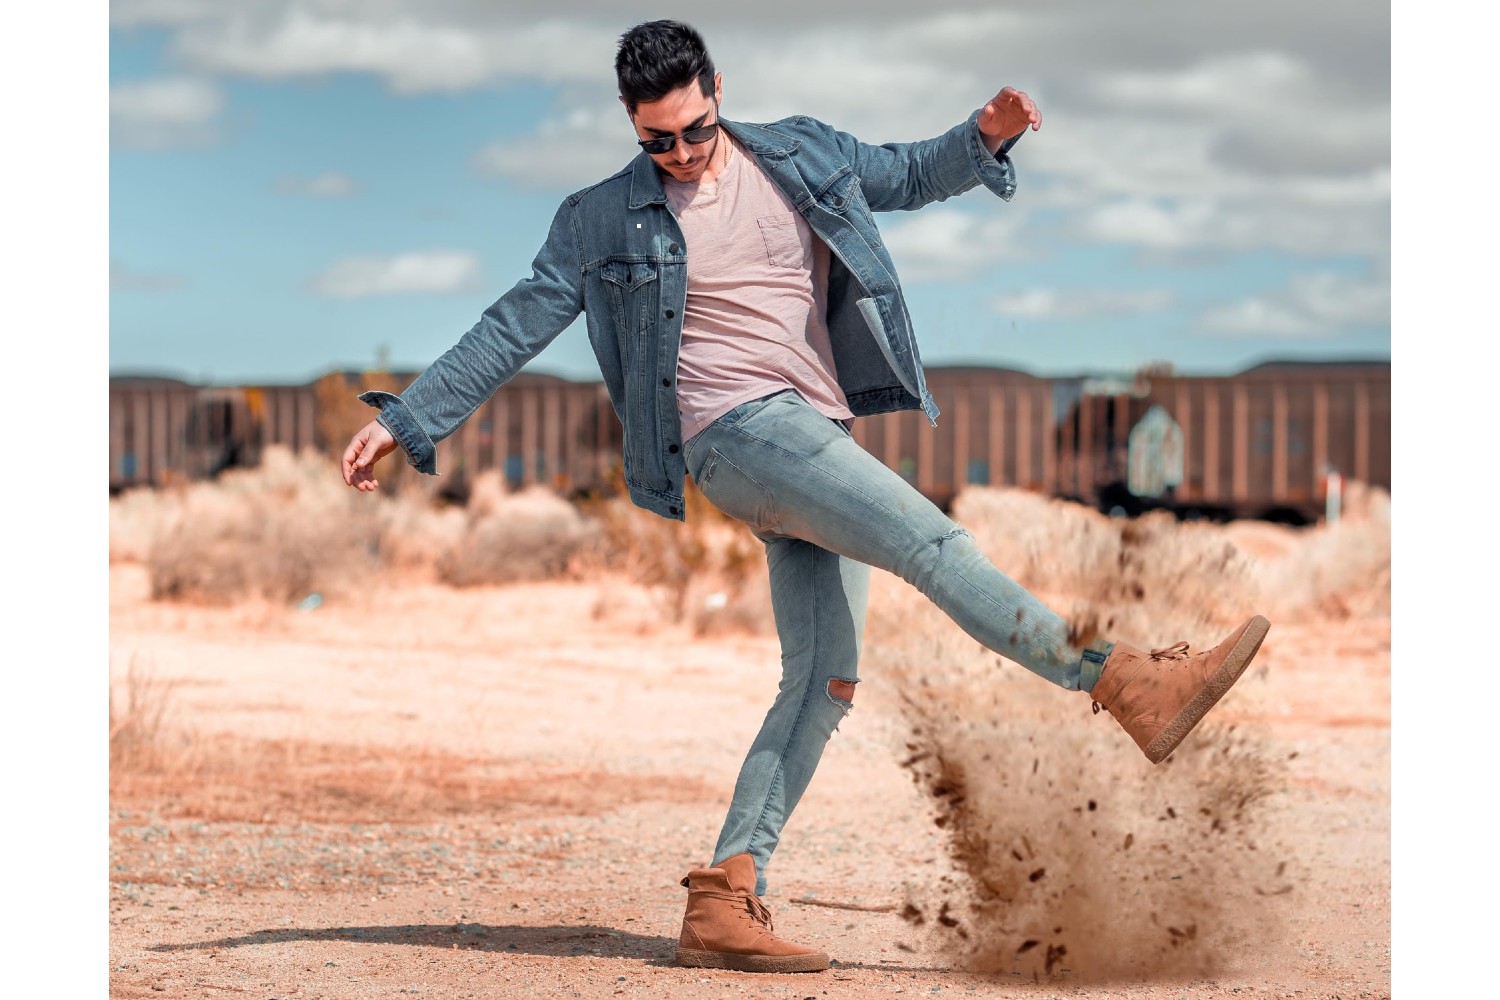 Blue Jeans with Cowboy Boots Relaxed Outfits For Men (5 ideas